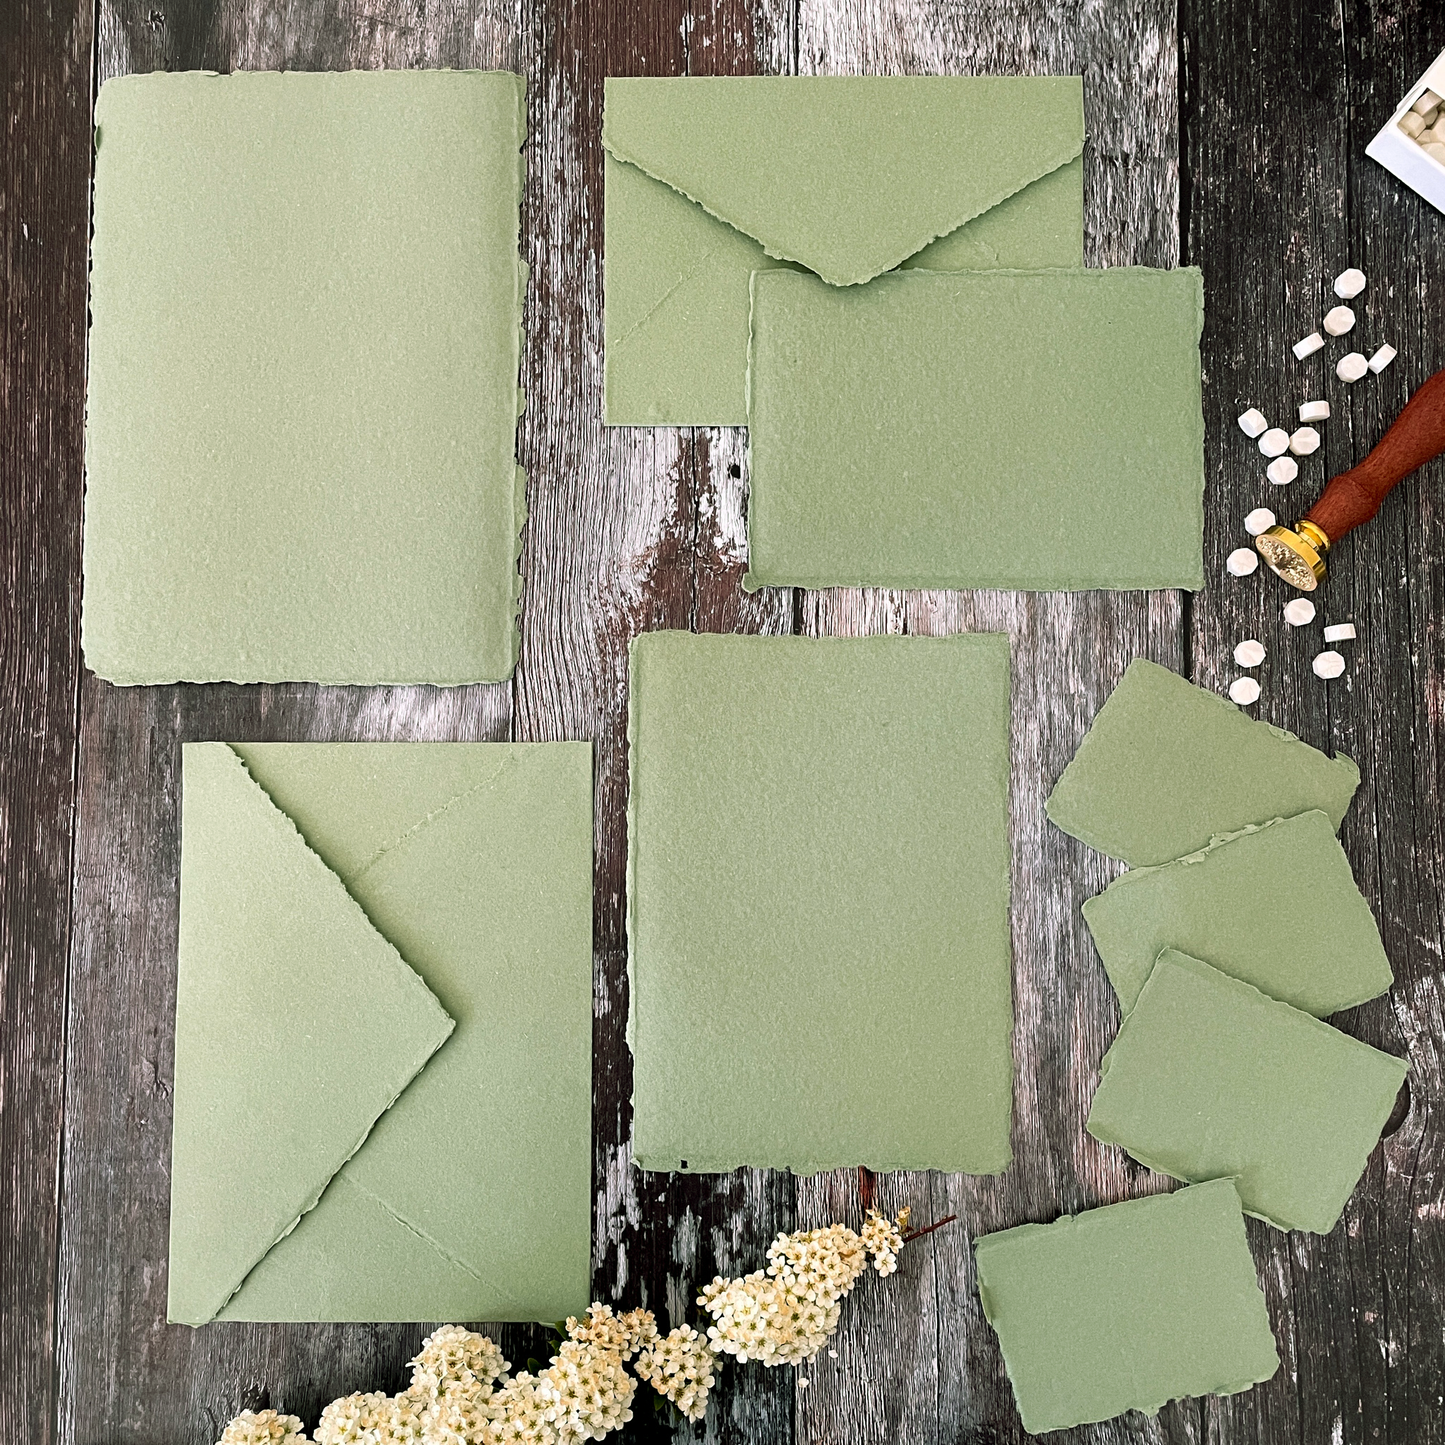 Sage green handmade recycled paper with a deckled edge.  High Quality Recycled cotton rag paper, card and envelopes.  By The Natural paper Company